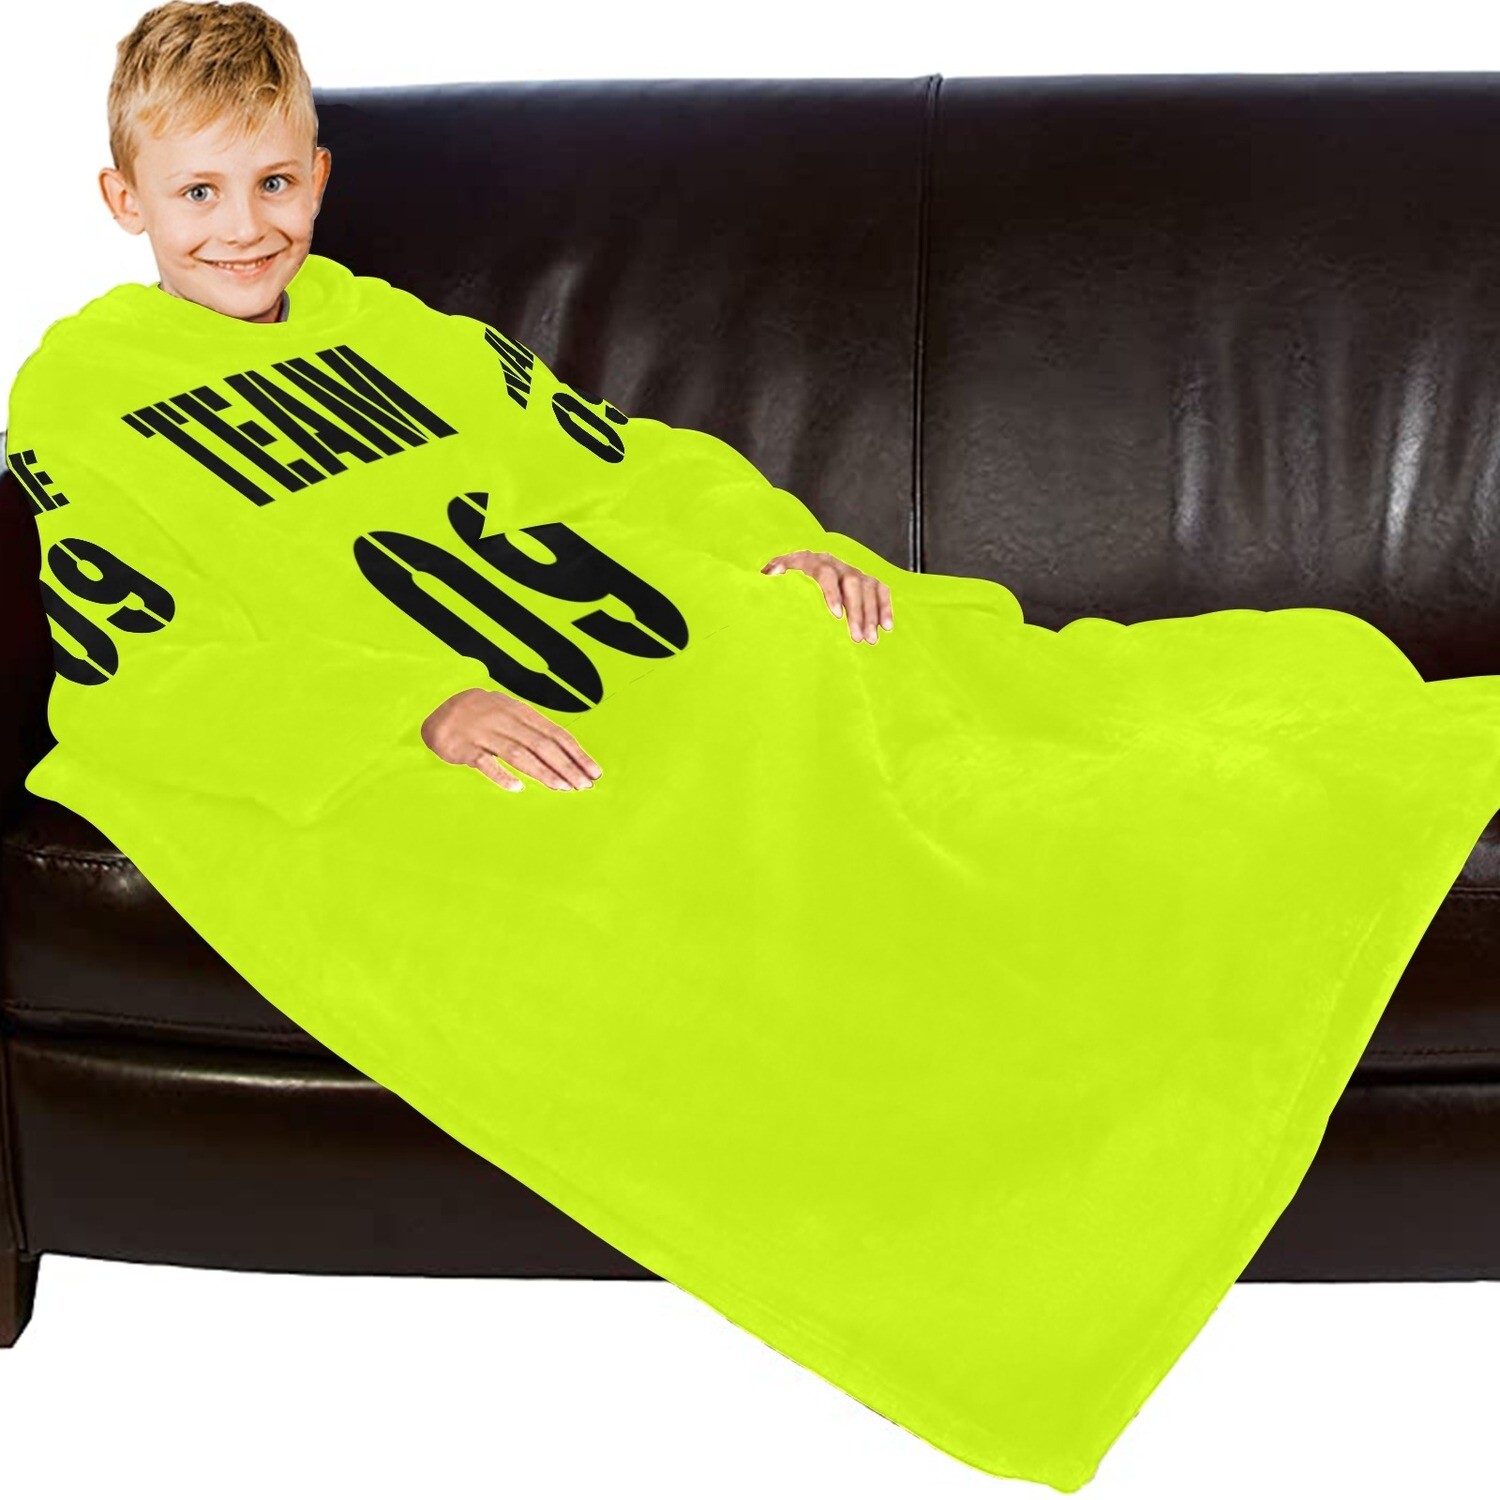 🤴🏽👸🏽Custom Team Wearable Blanket for Kids, Sports Uniform, Personalized Blanket with sleeves, custom design your own Blanket, add team, name, gift, 47.2"x50.39" / 111.89 cm x 127.99 cm